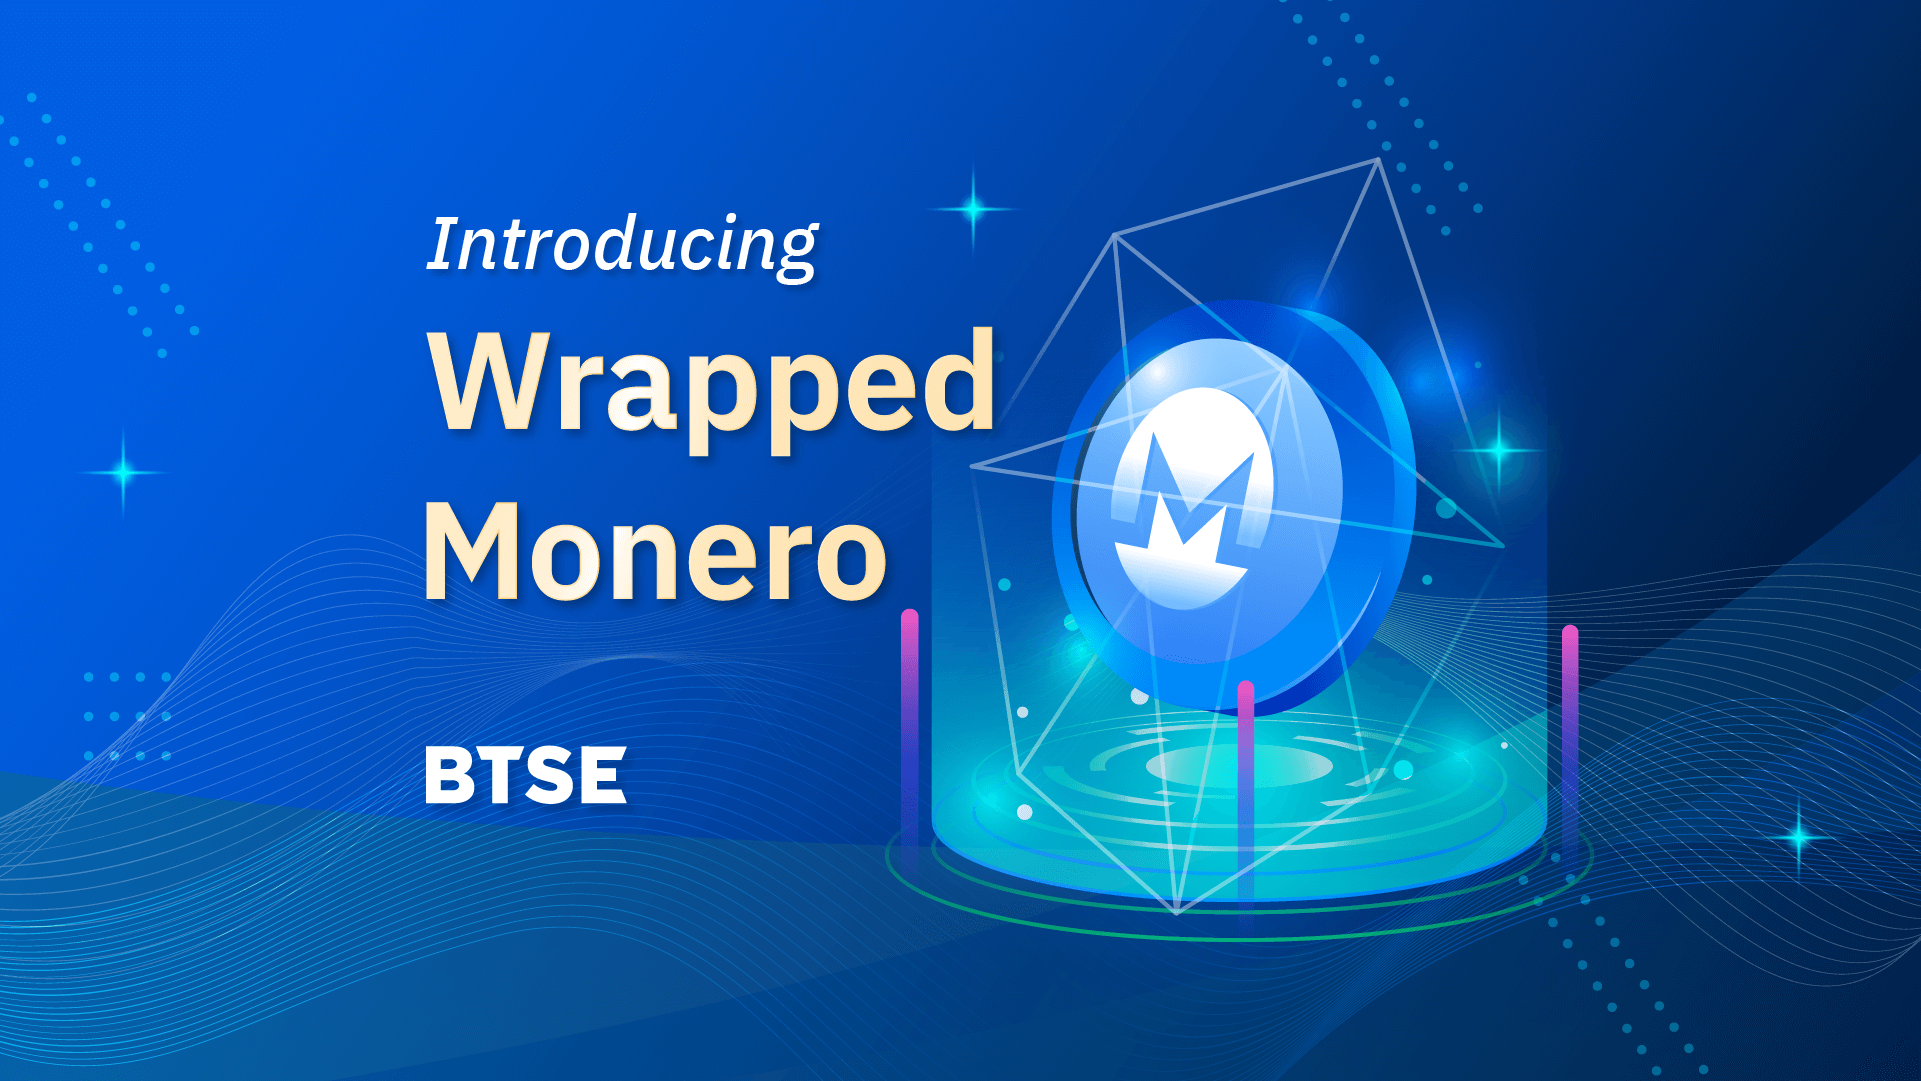 Introducing Wrapped Monero